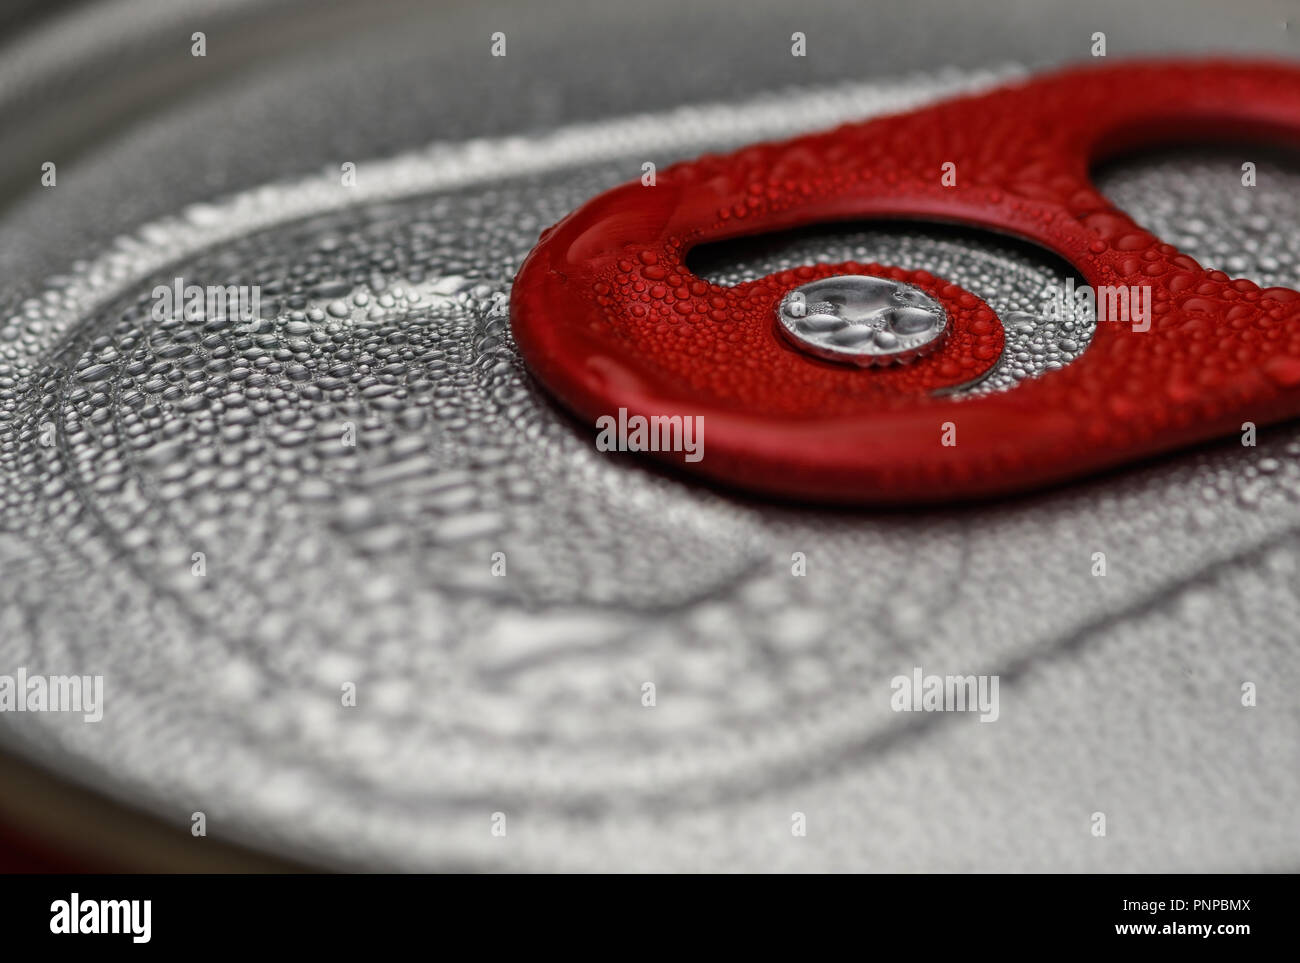 Red can opening tab close-up with condensation droplets Stock Photo